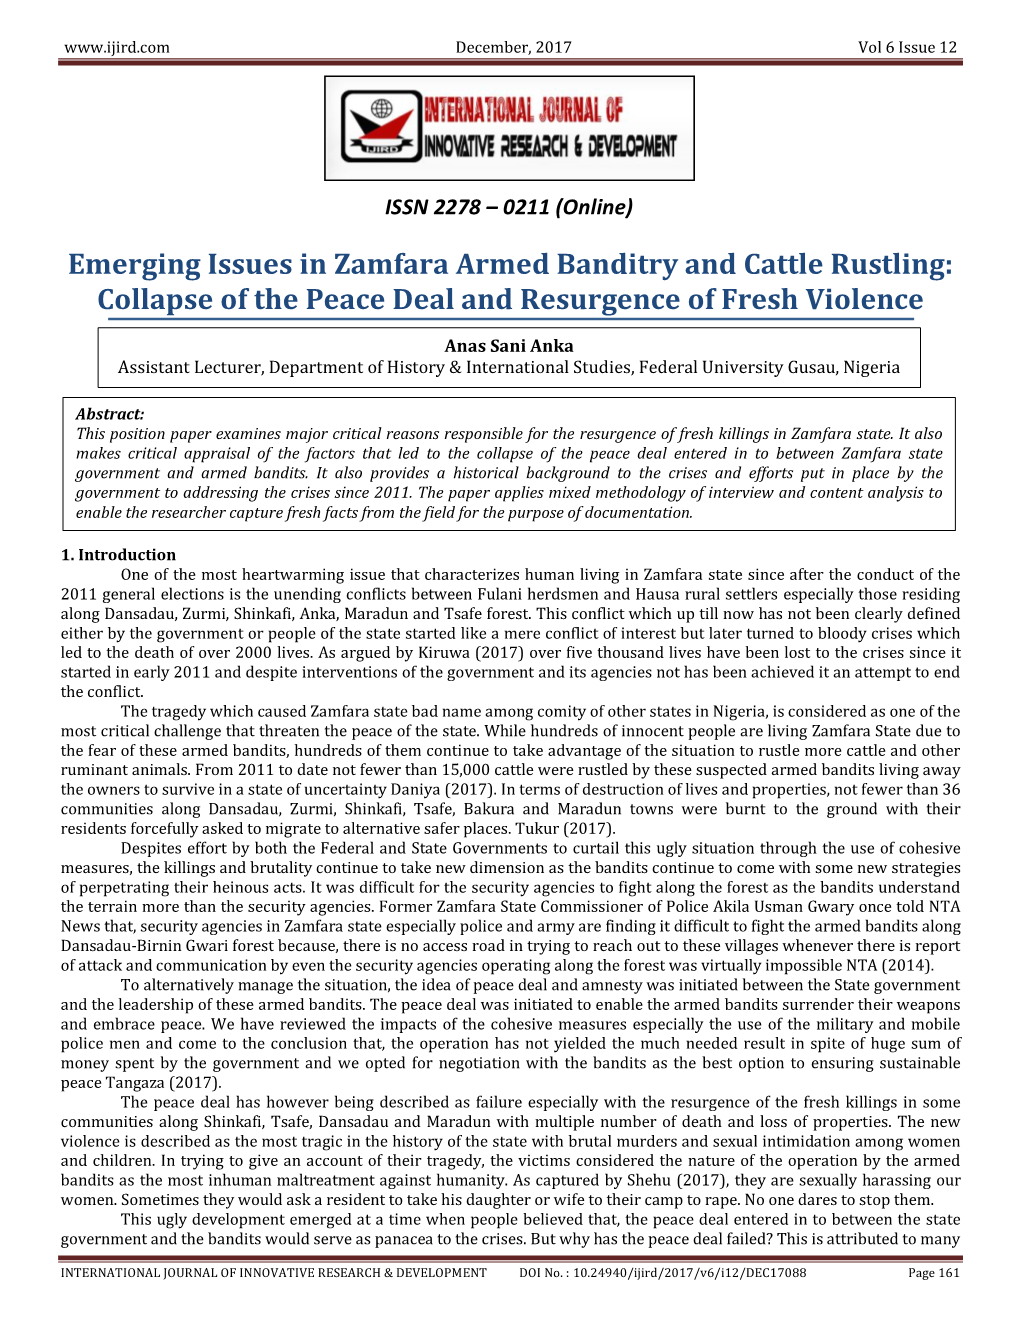 Emerging Issues in Zamfara Armed Banditry and Cattle Rustling: Collapse of the Peace Deal and Resurgence of Fresh Violence